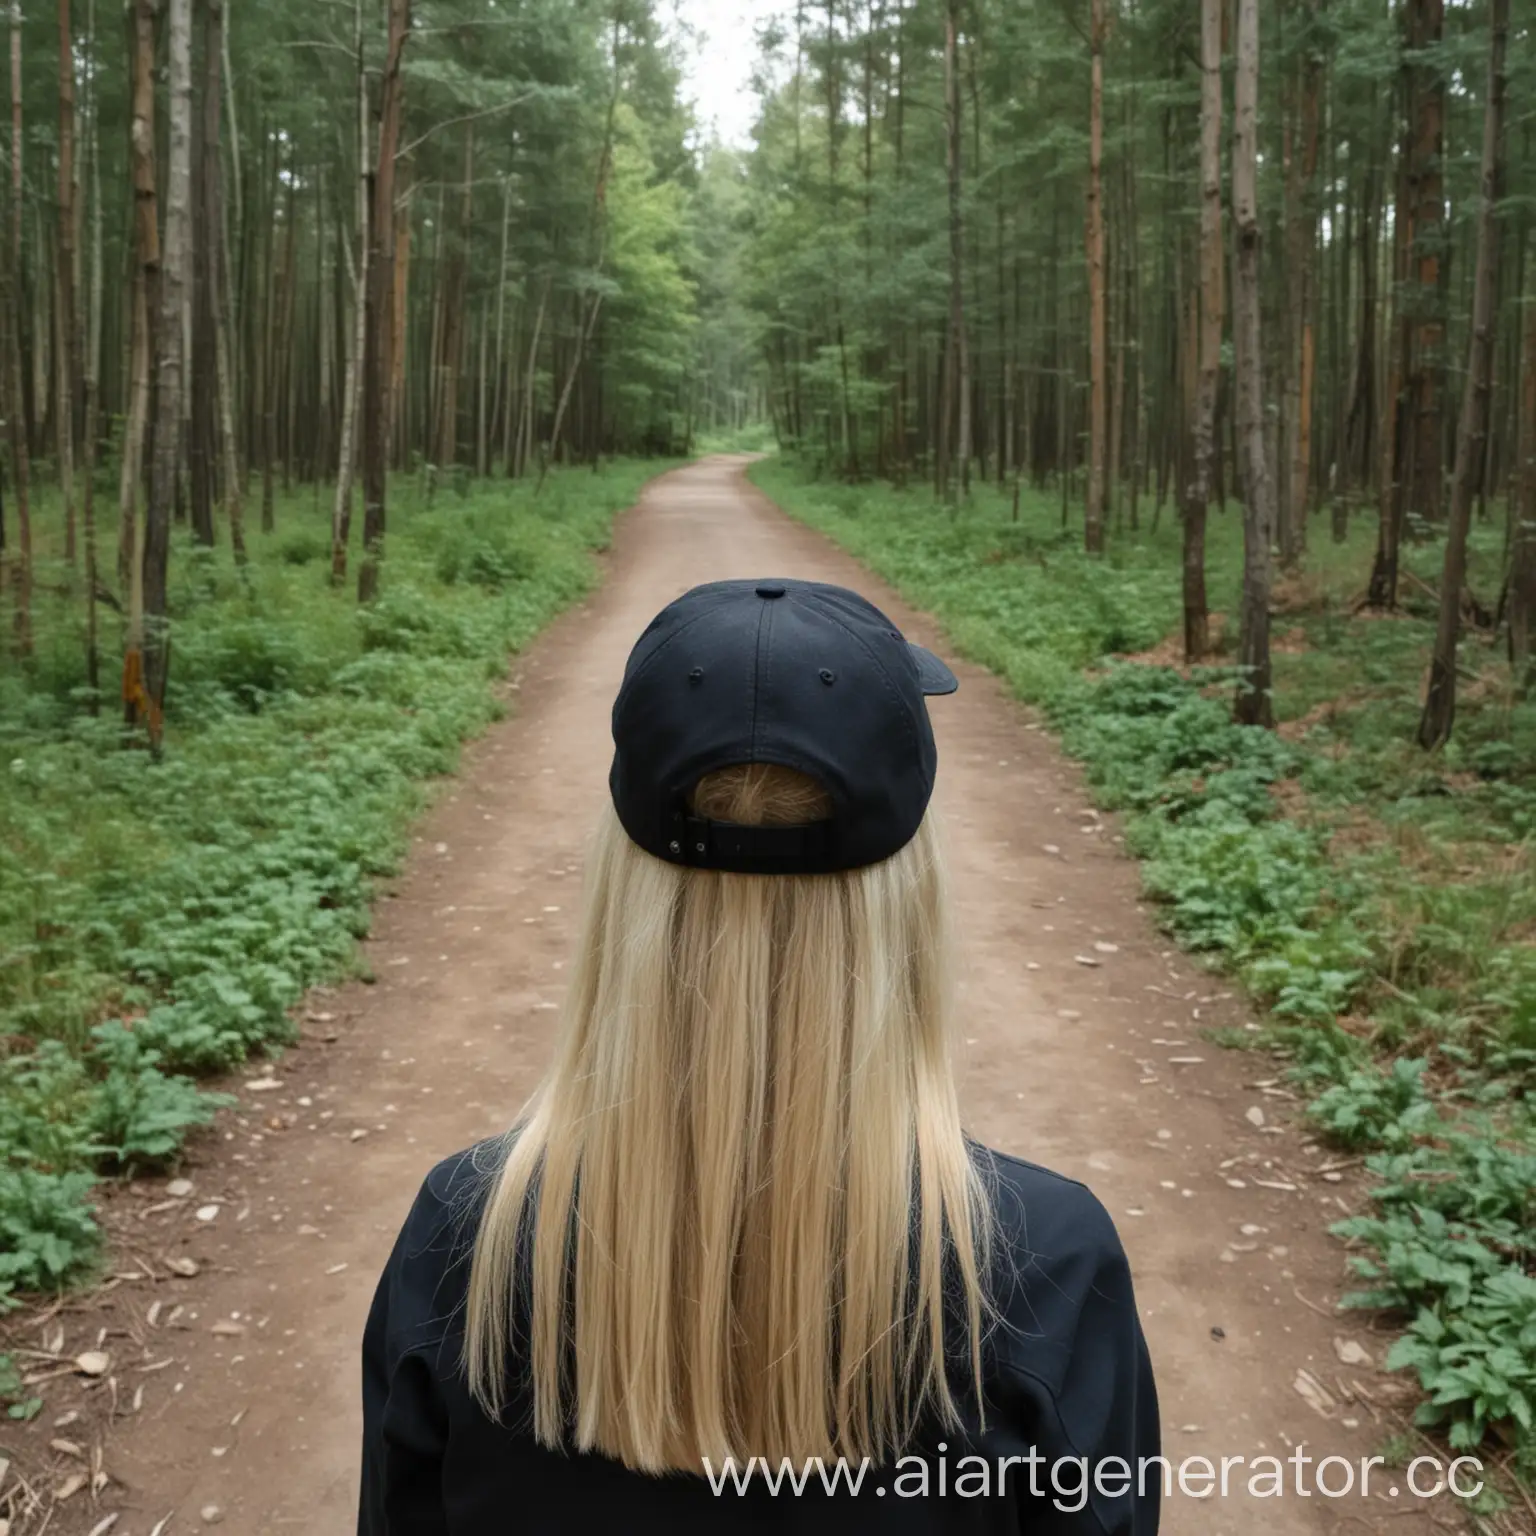 Blonde-Girl-in-Cap-Standing-Alone-in-Forest-Path